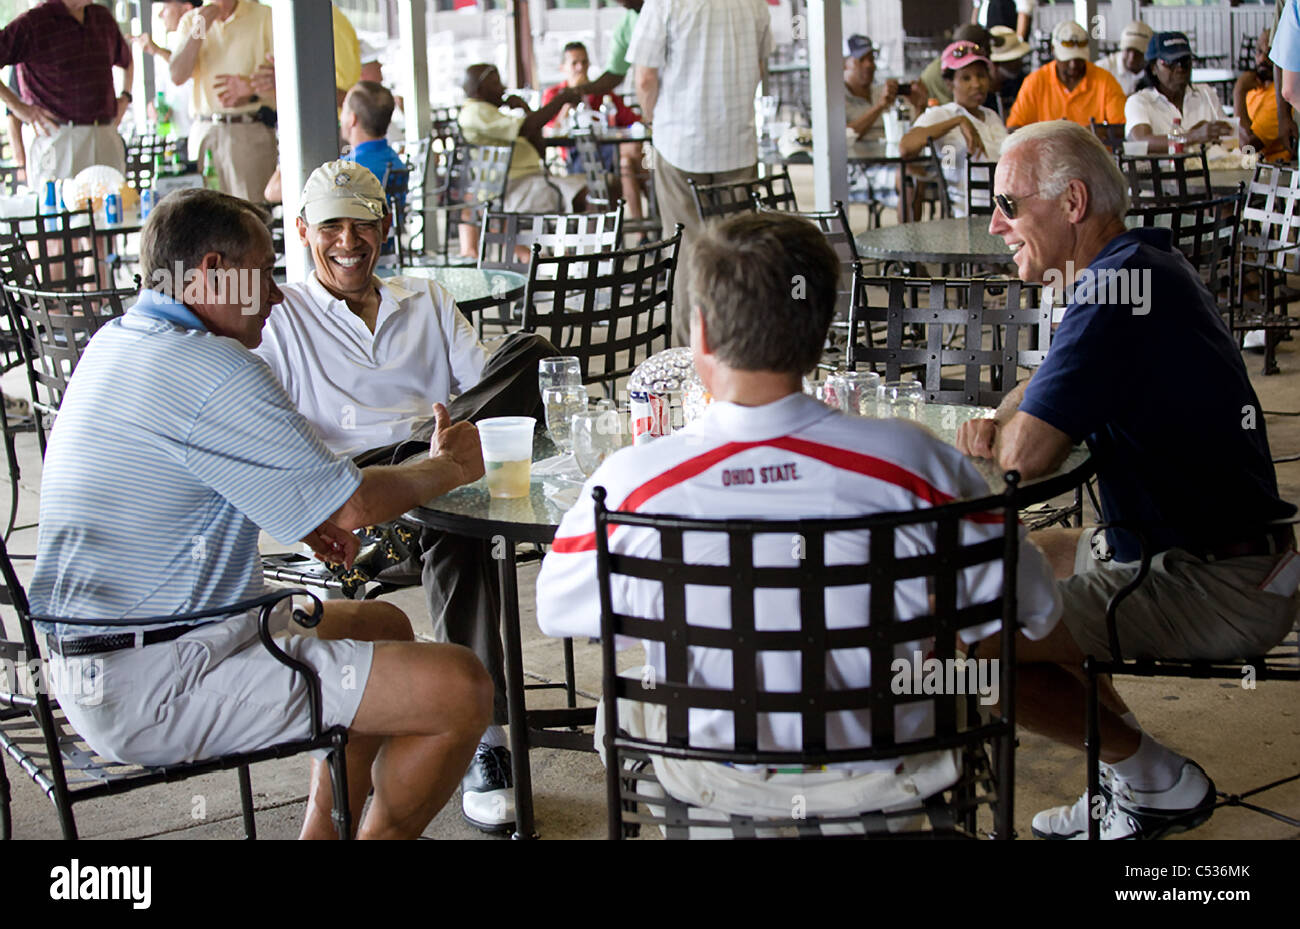 President Barack Obama relaxes after a round of golf with Vice President Joe Biden, Speaker of the House John Boehner, and Ohio Stock Photo